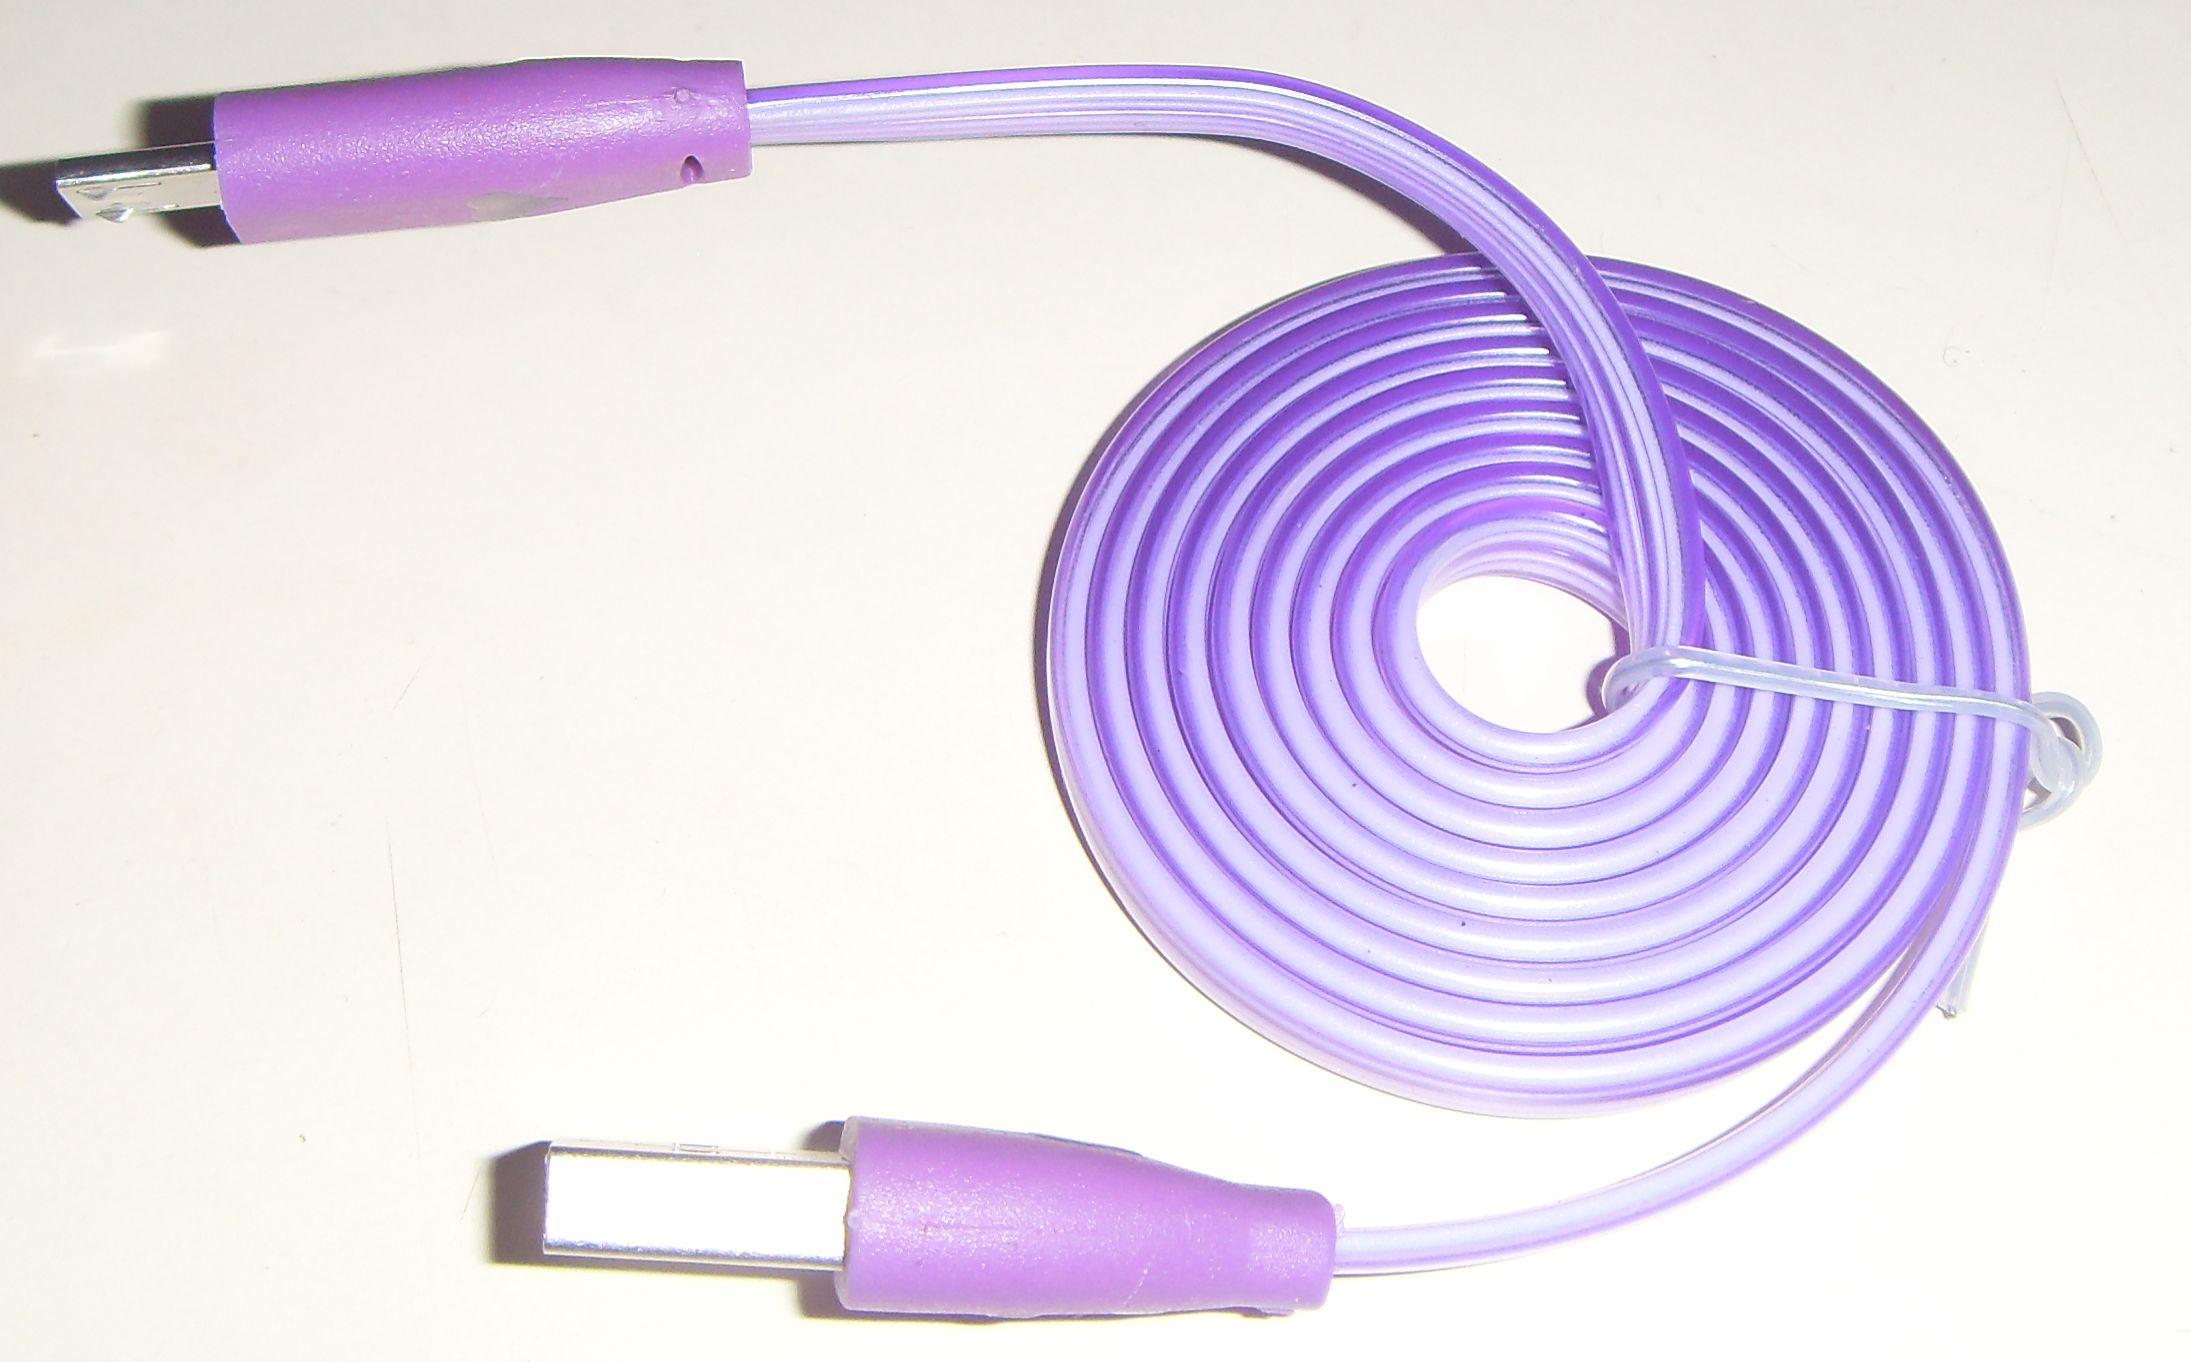 sumsung cable (colour changing led light purple).jpg